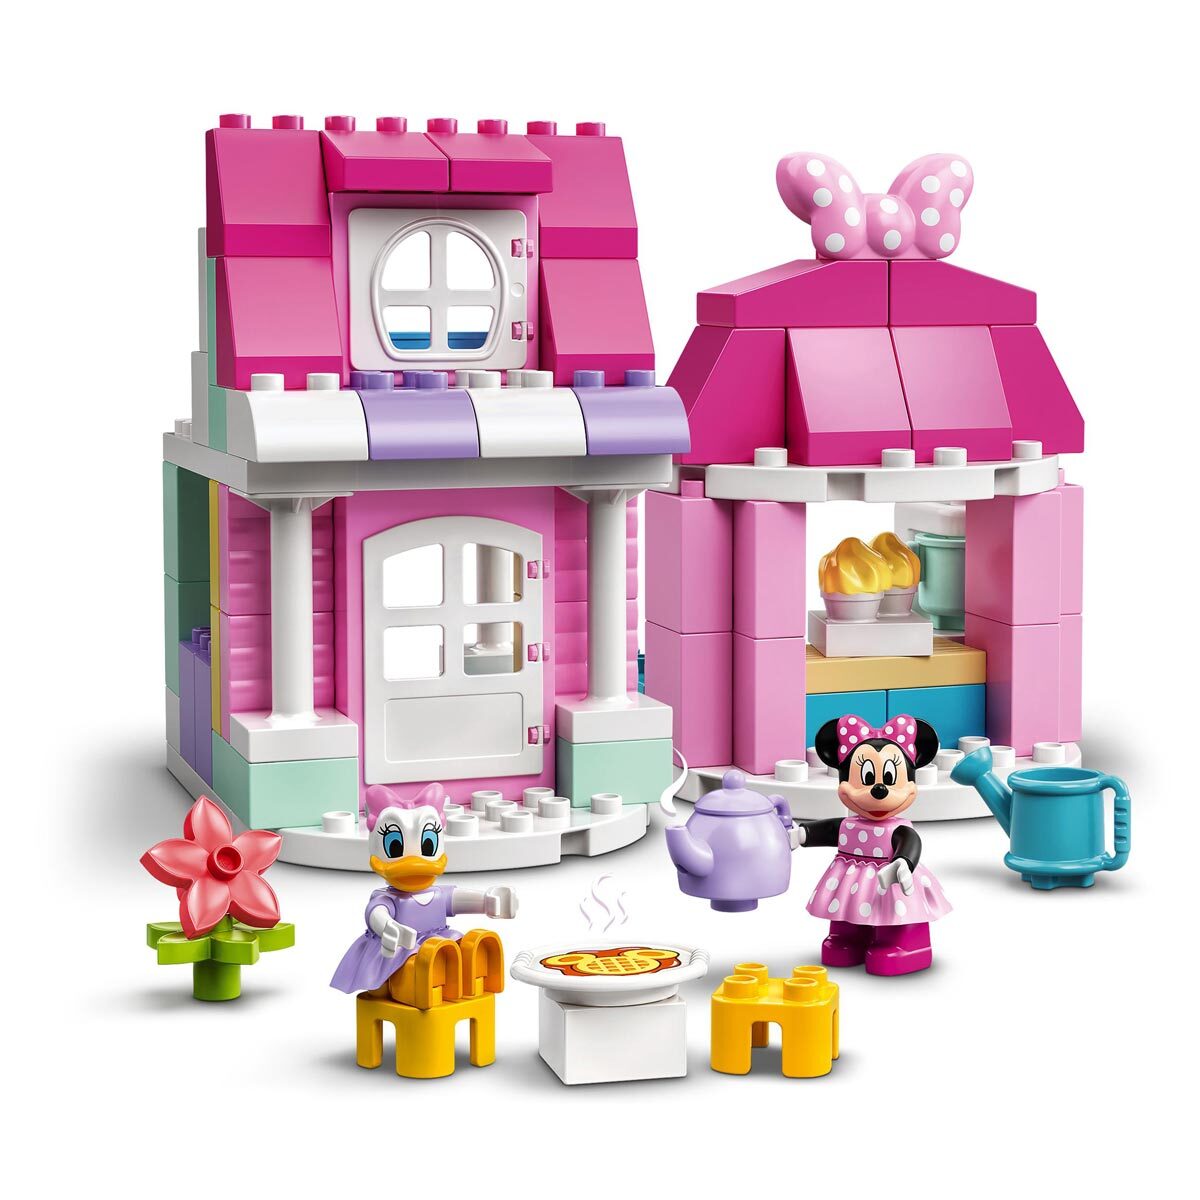 Buy LEGO DUPLO Minnie's House & Cafe Overview Image at costco.co.uk